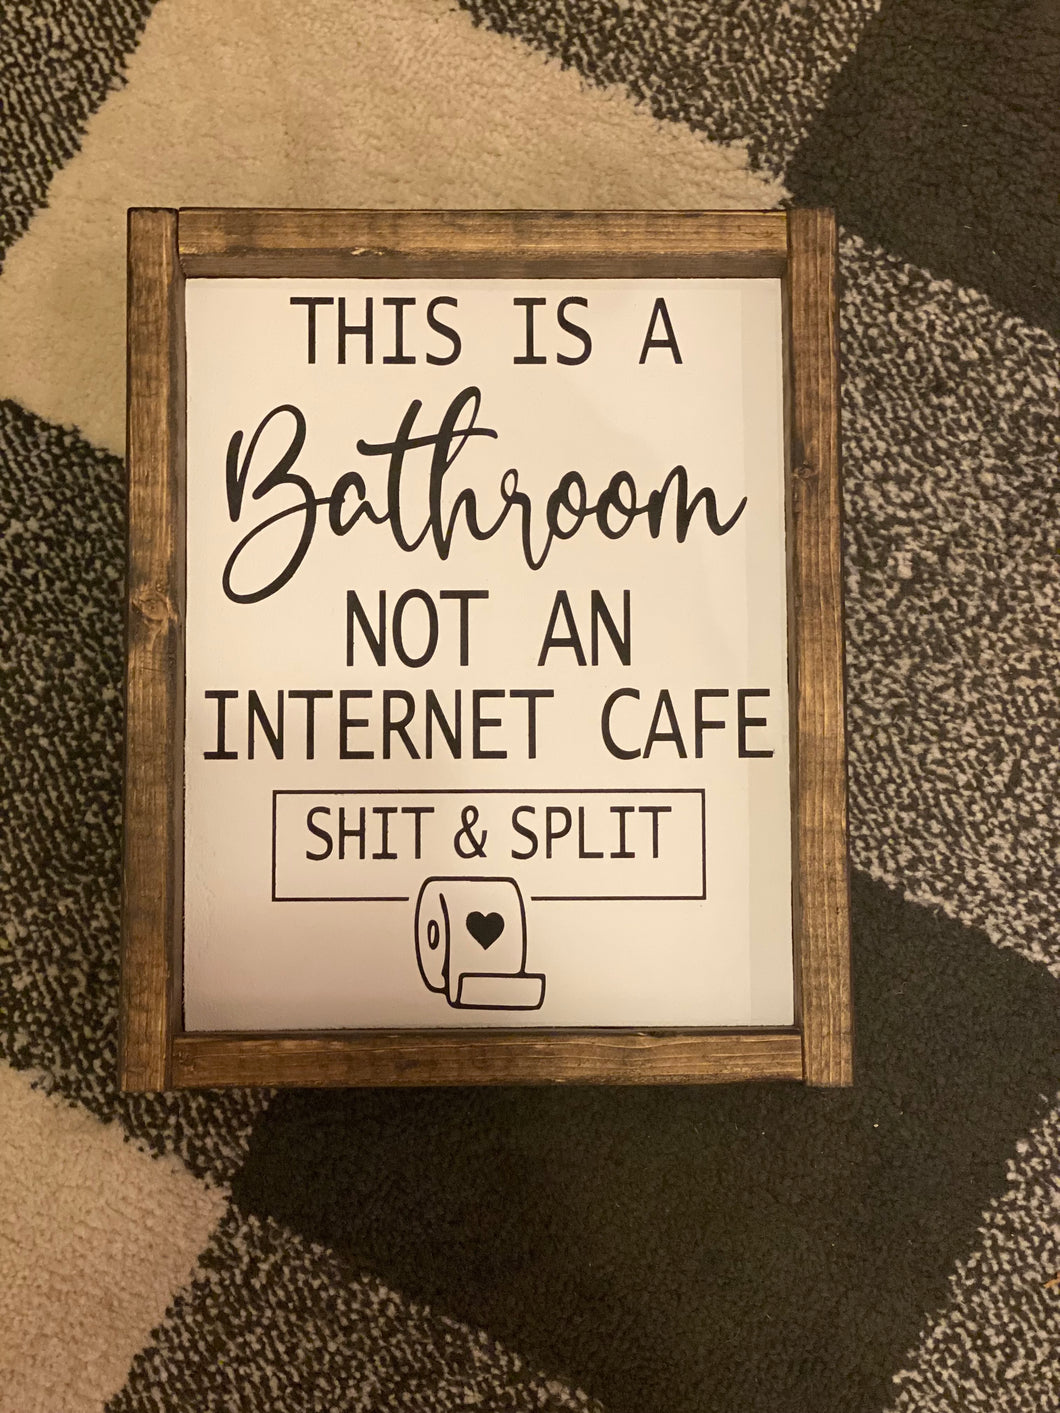 This is a bathroom. Not a Internet cafe.